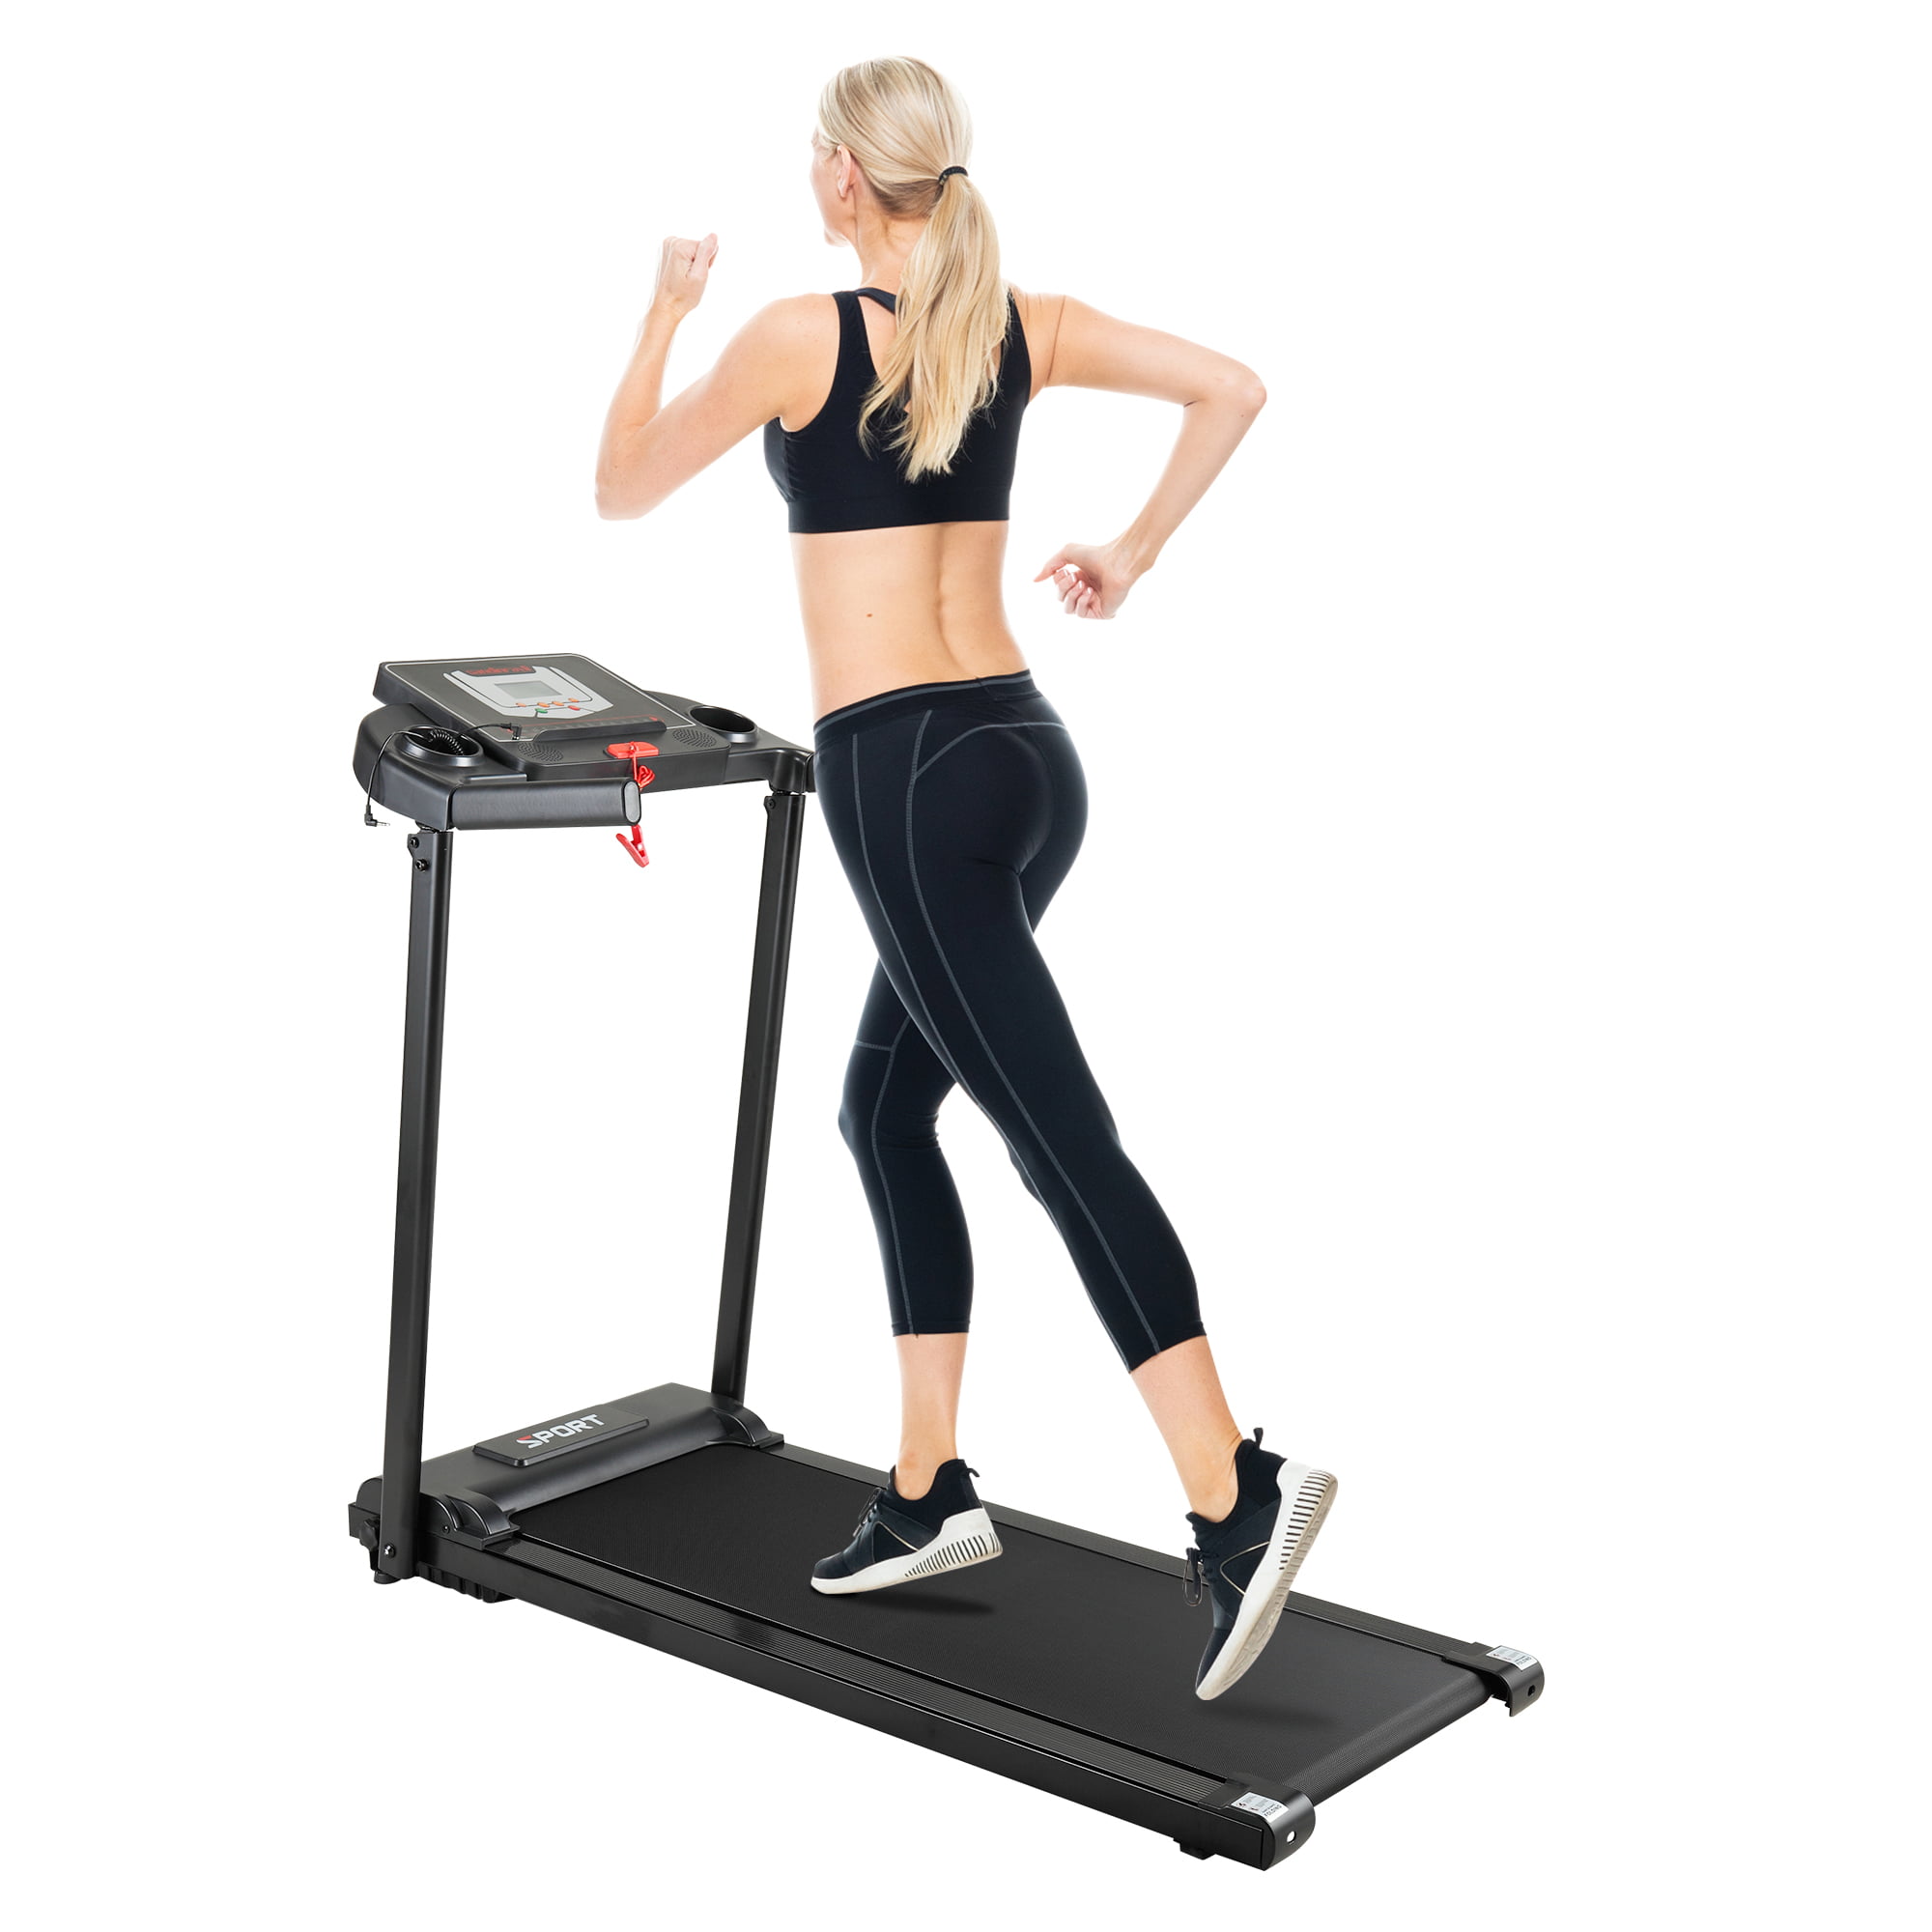 JAXPETY Folding Exercise Machine 2.0HP Electric Motorized Treadmill for Home Gym Exercise Walking Fitness 